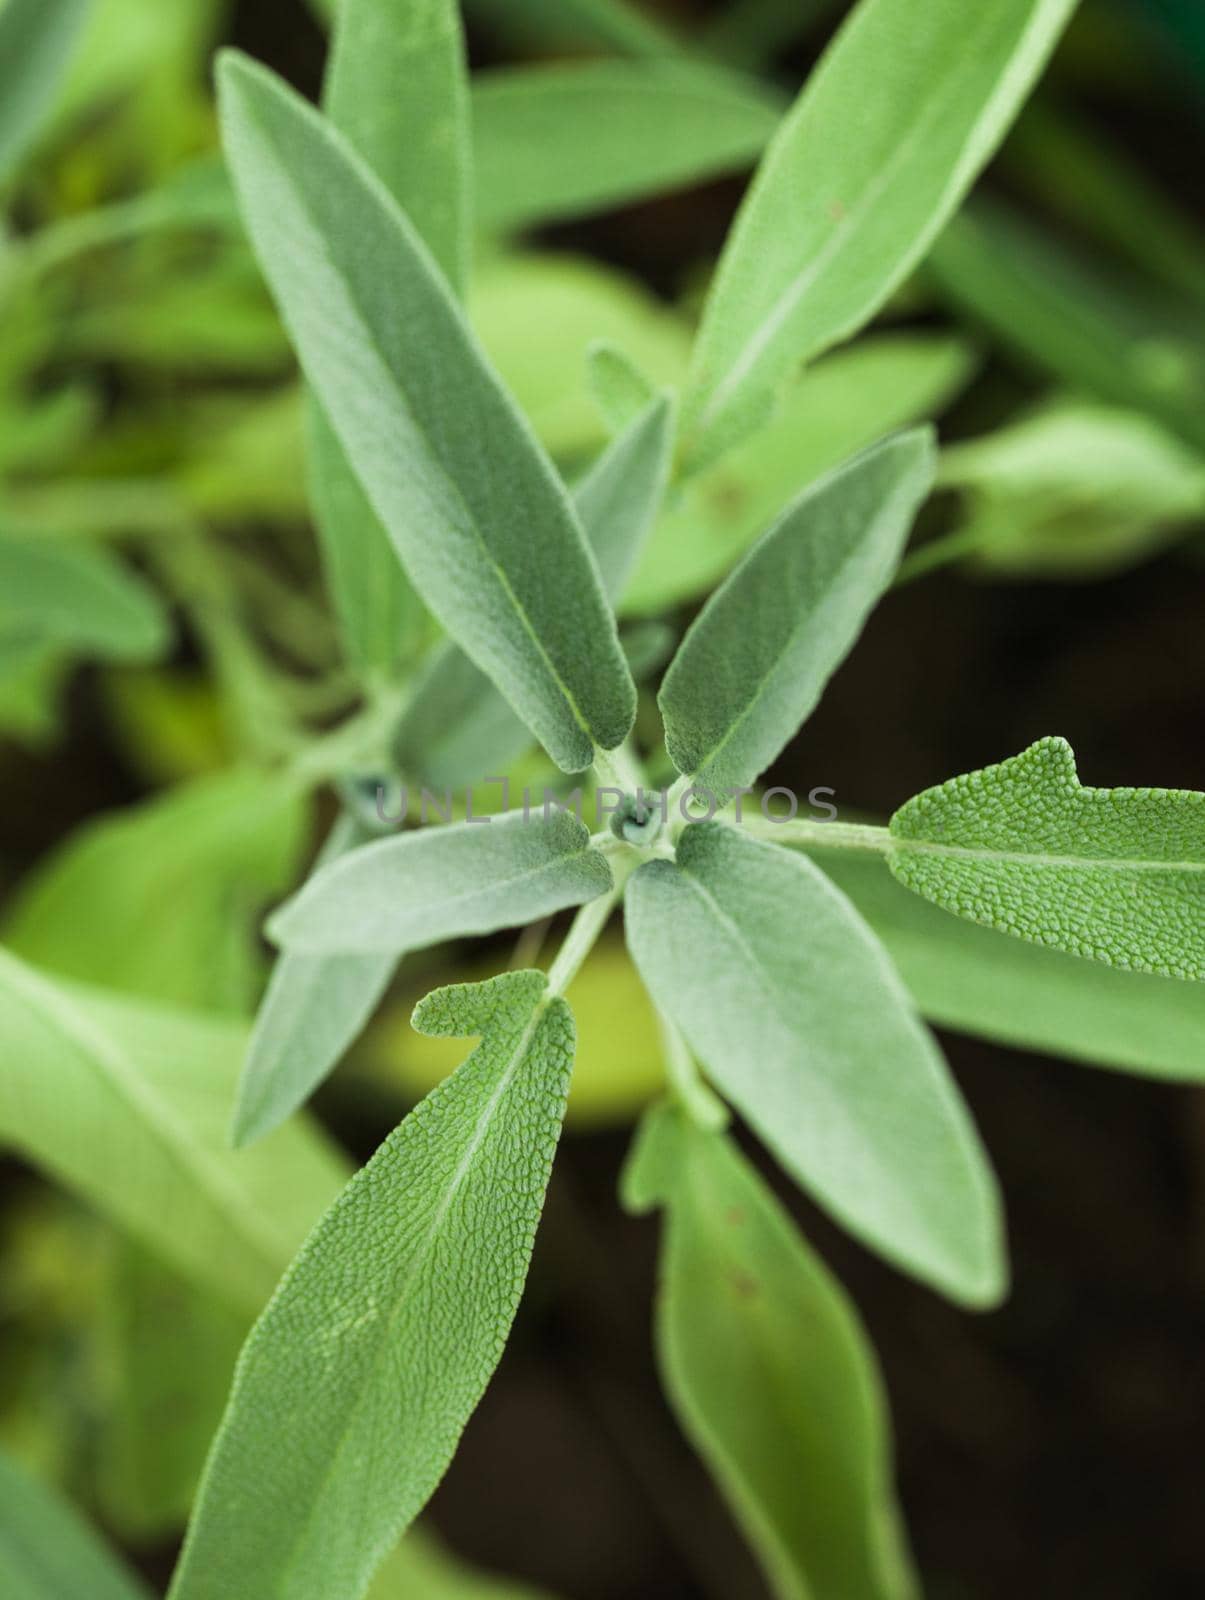 Sage plant in the garde, macro view of leaves